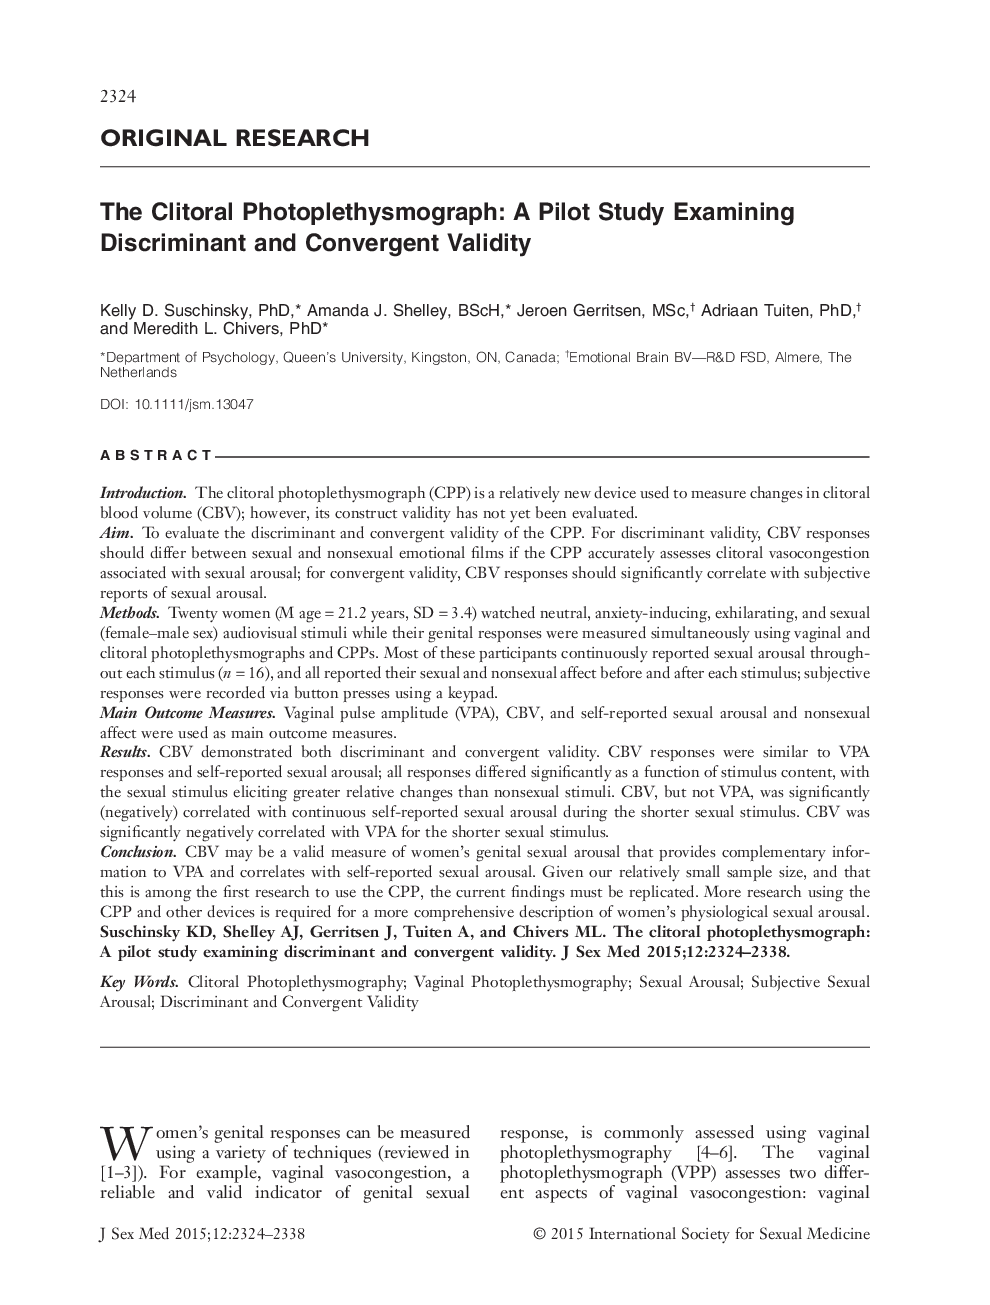 The Clitoral Photoplethysmograph: A Pilot Study Examining Discriminant and Convergent Validity